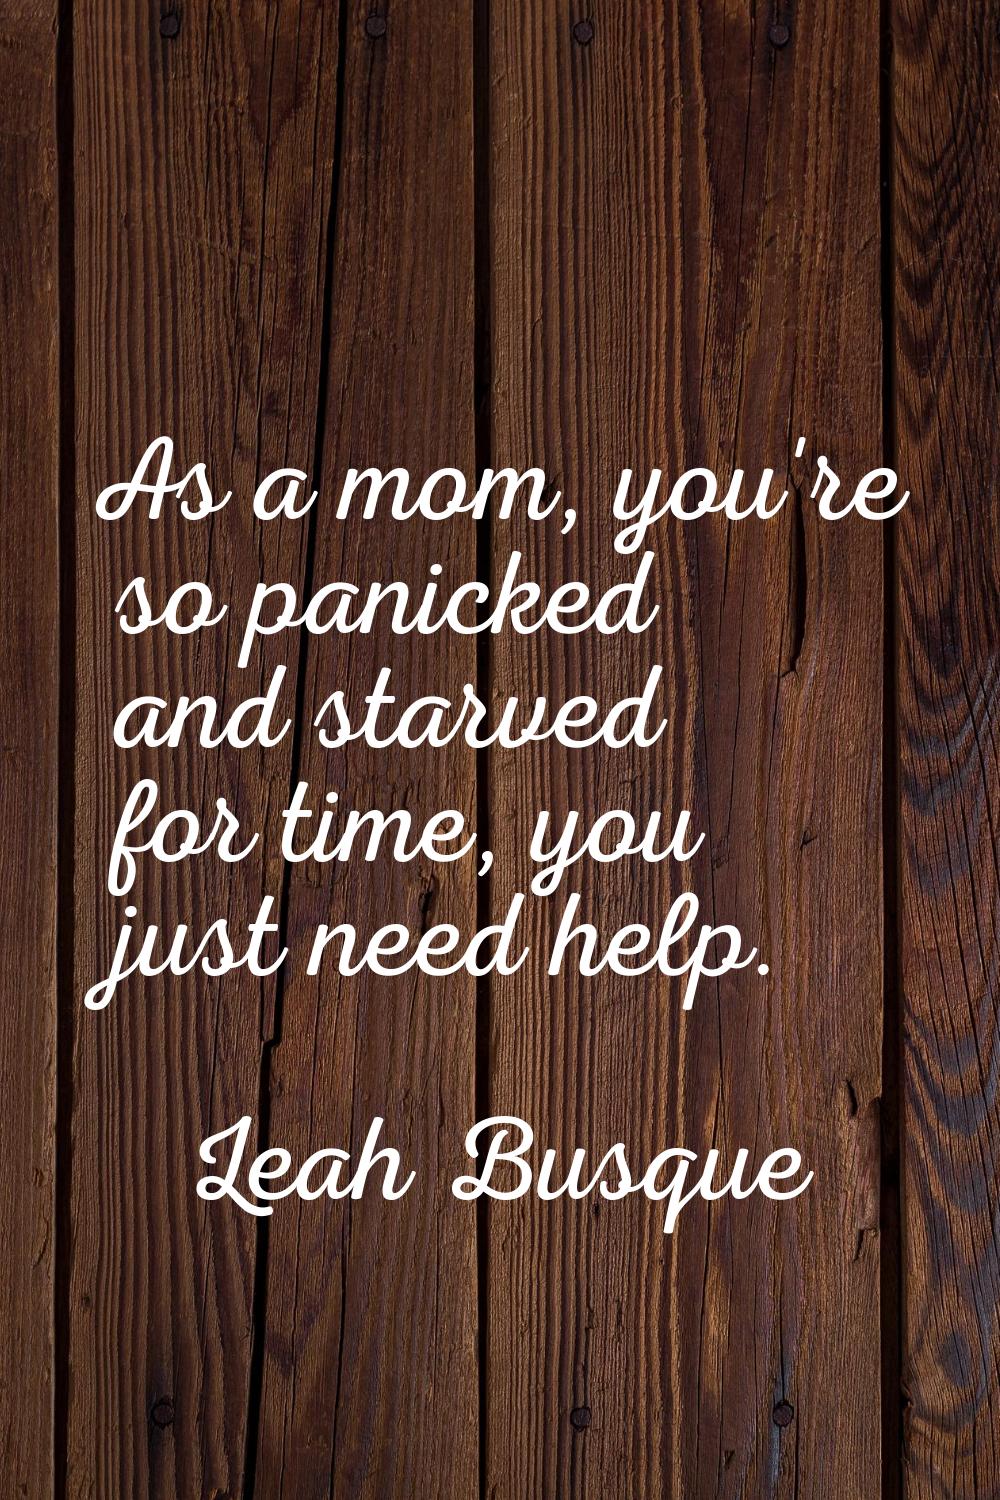 As a mom, you're so panicked and starved for time, you just need help.